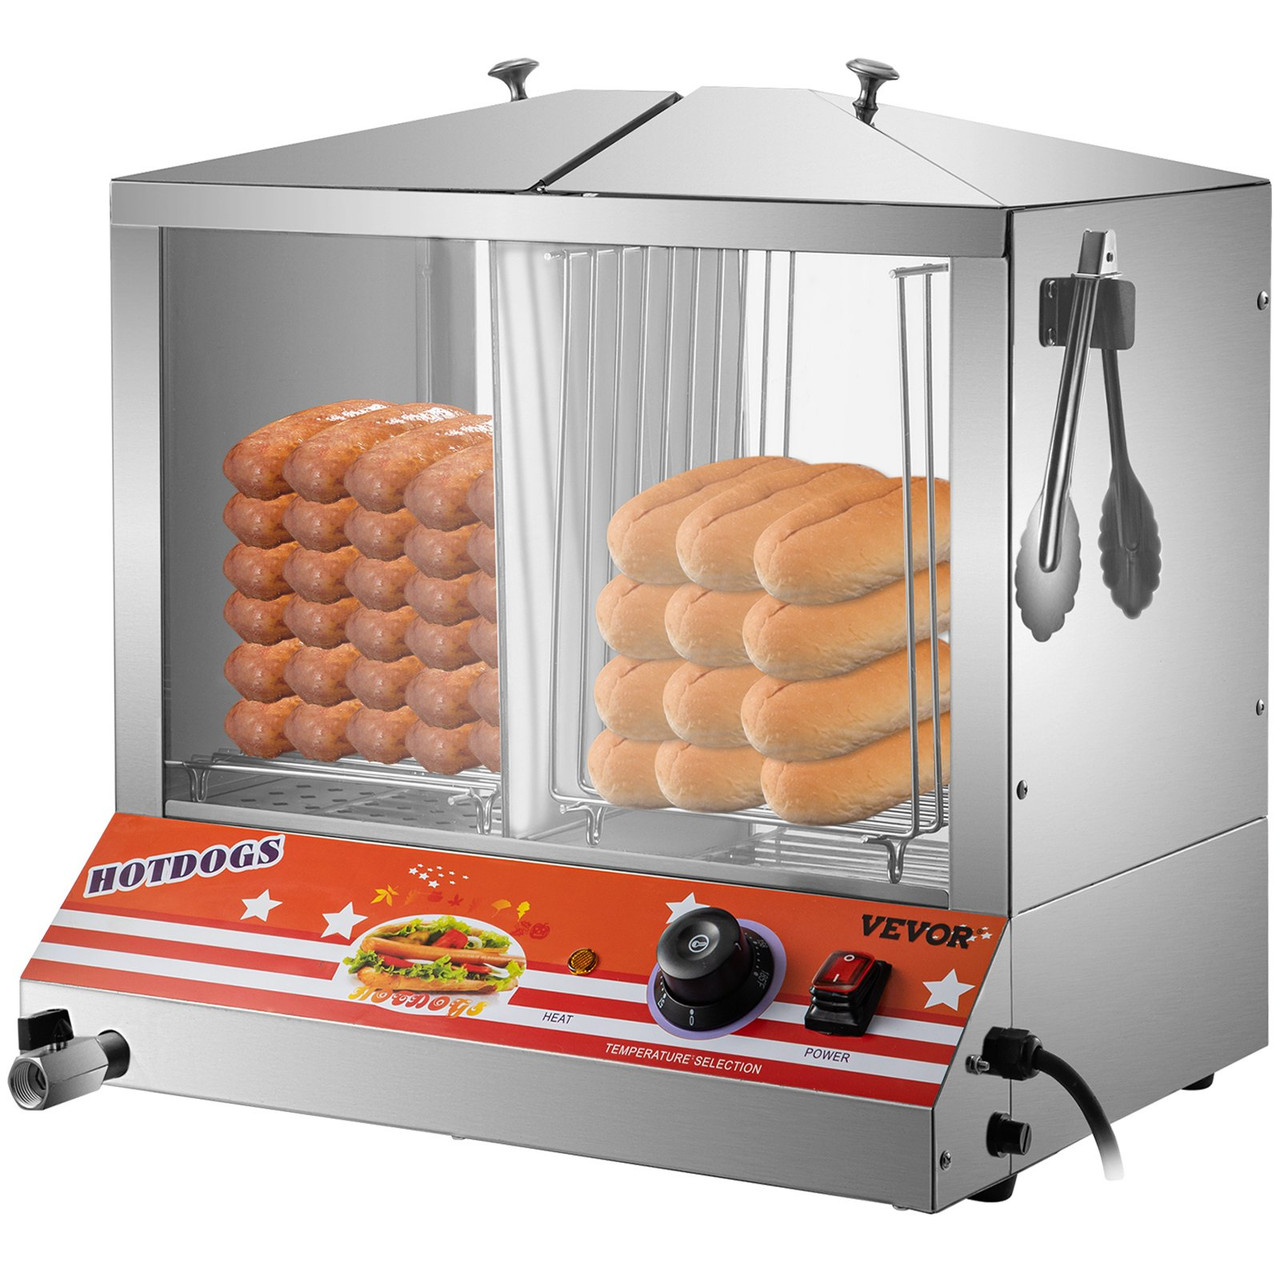 Hot Dog Steamer, 36L/32.69Qt, Top Load Hut Steamer for 100 Hot Dogs & 48 Buns, Electric Bun Warmer Cooker with Acrylic Windows Partition Plate Shelves Food Clip PTFE Tape, Stainless Steel